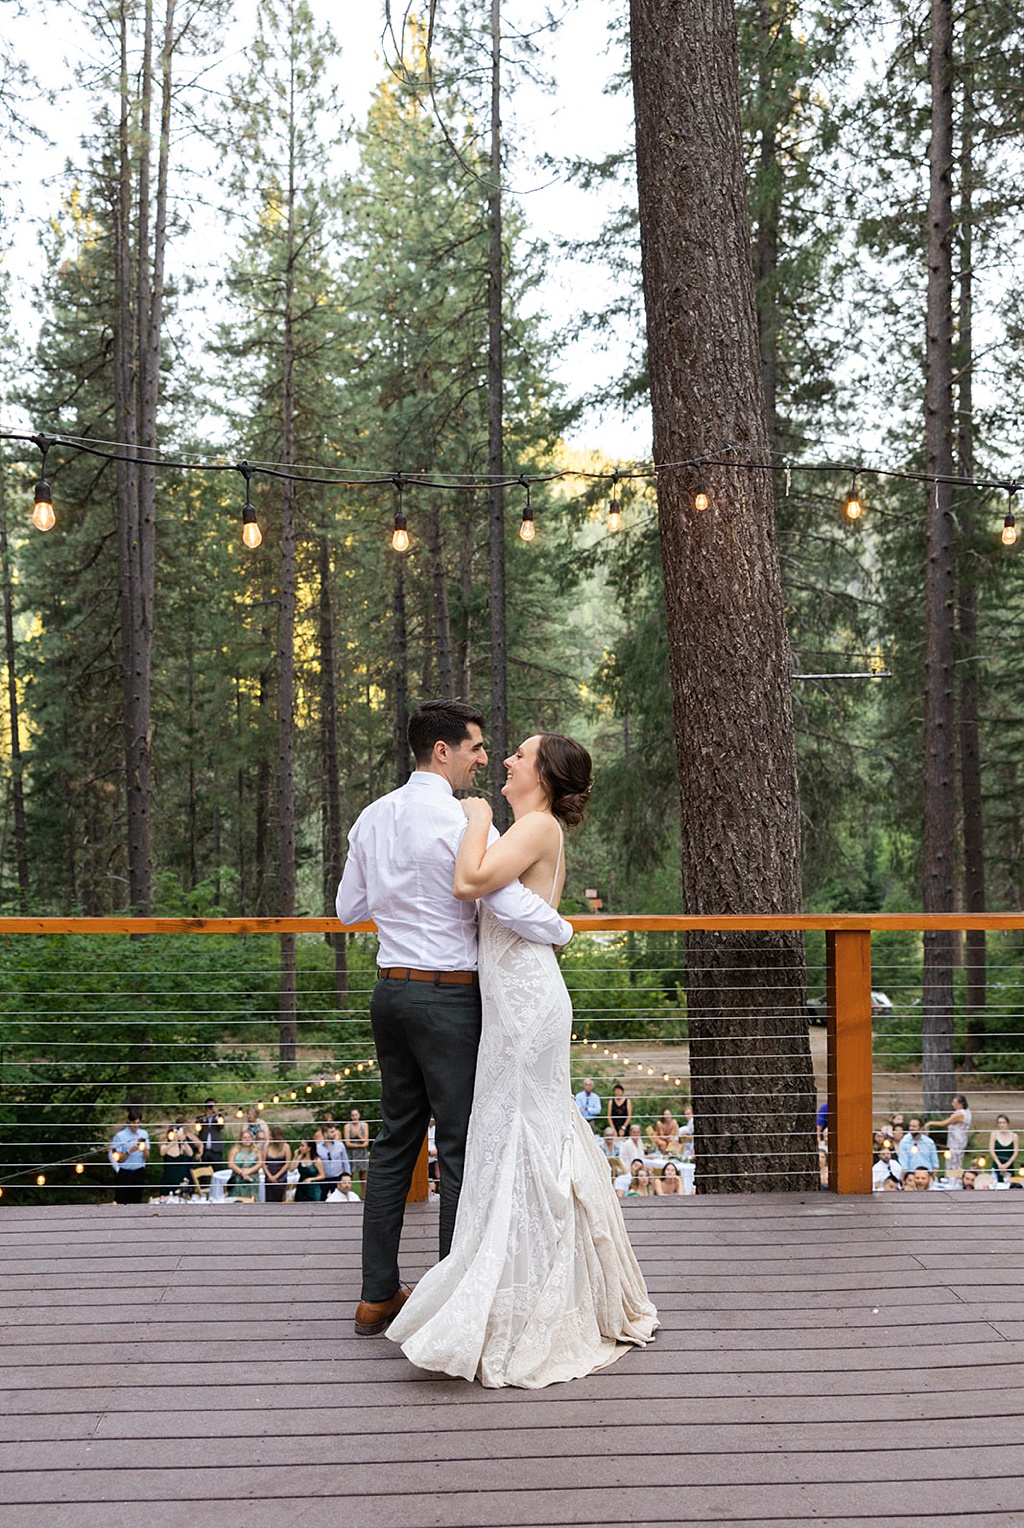 The first dance at the wedding reception, with pines in the background